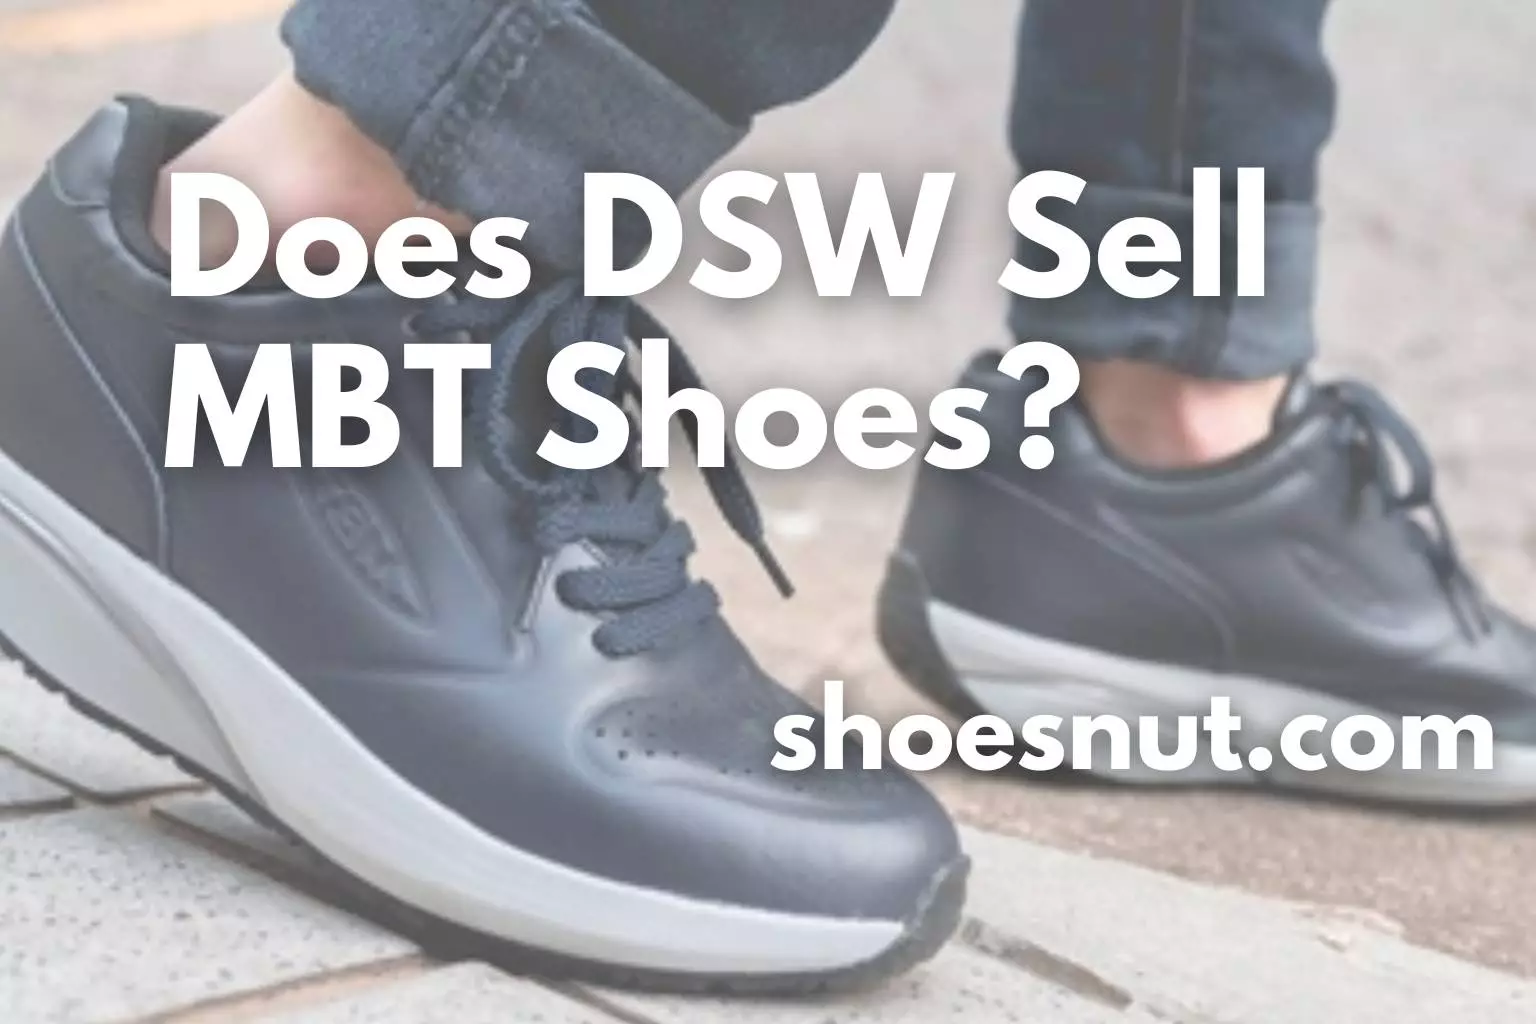 Does DSW Sell MBT Shoes?